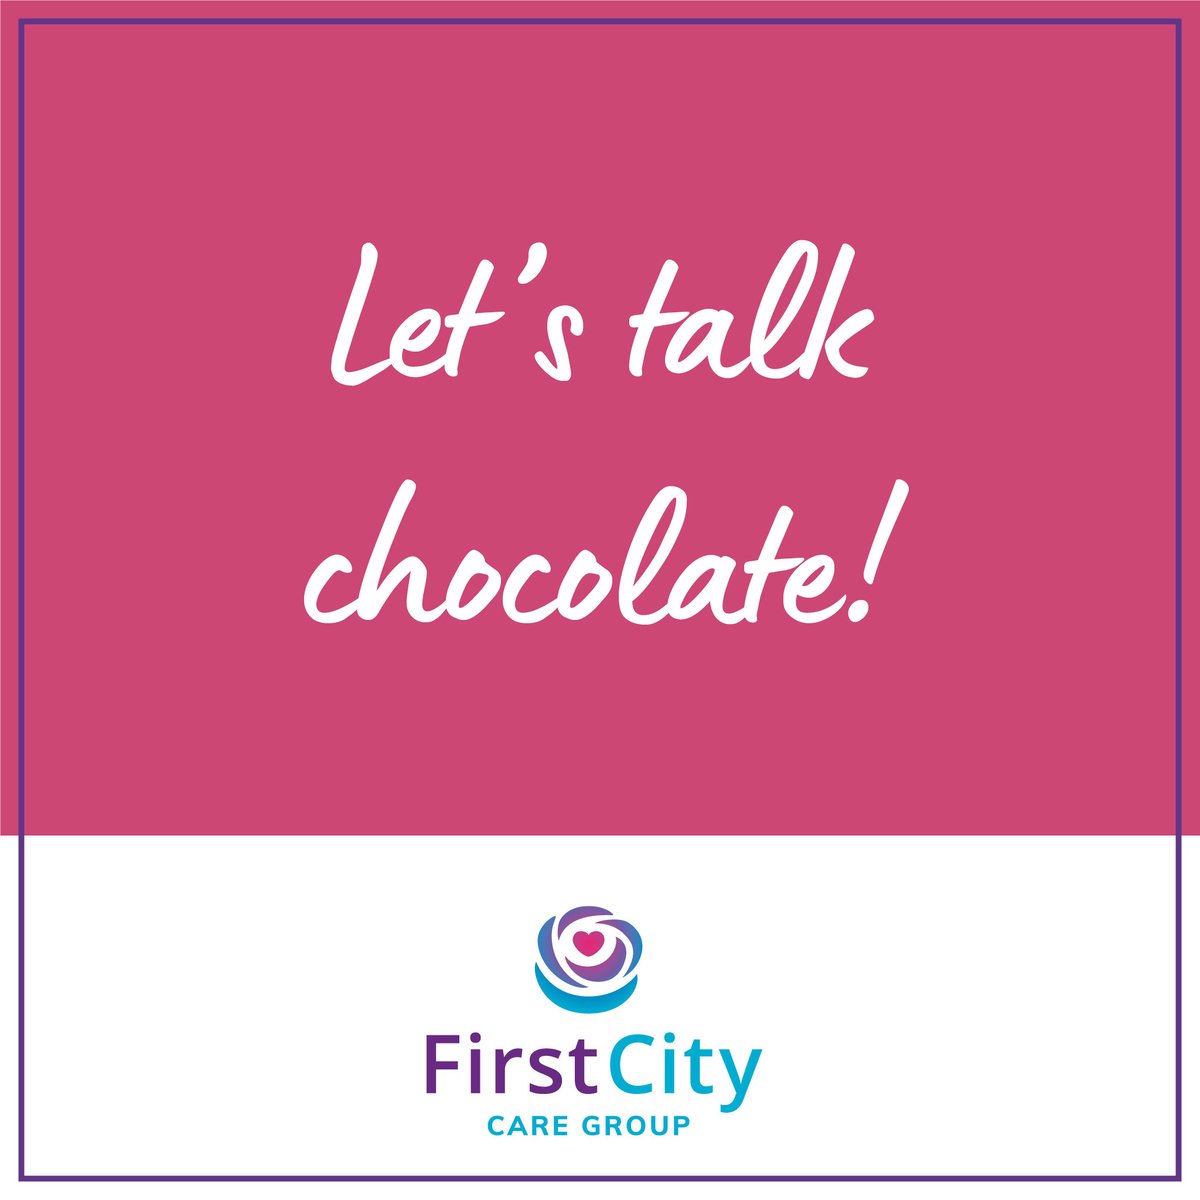 Easter is fast approaching, so why not share with us what your go-to chocolate is...

#TuesdayThoughts #TuesdayTopic #Gettoknowyourcolleagues #gettoknowme #Shareyourthoughts